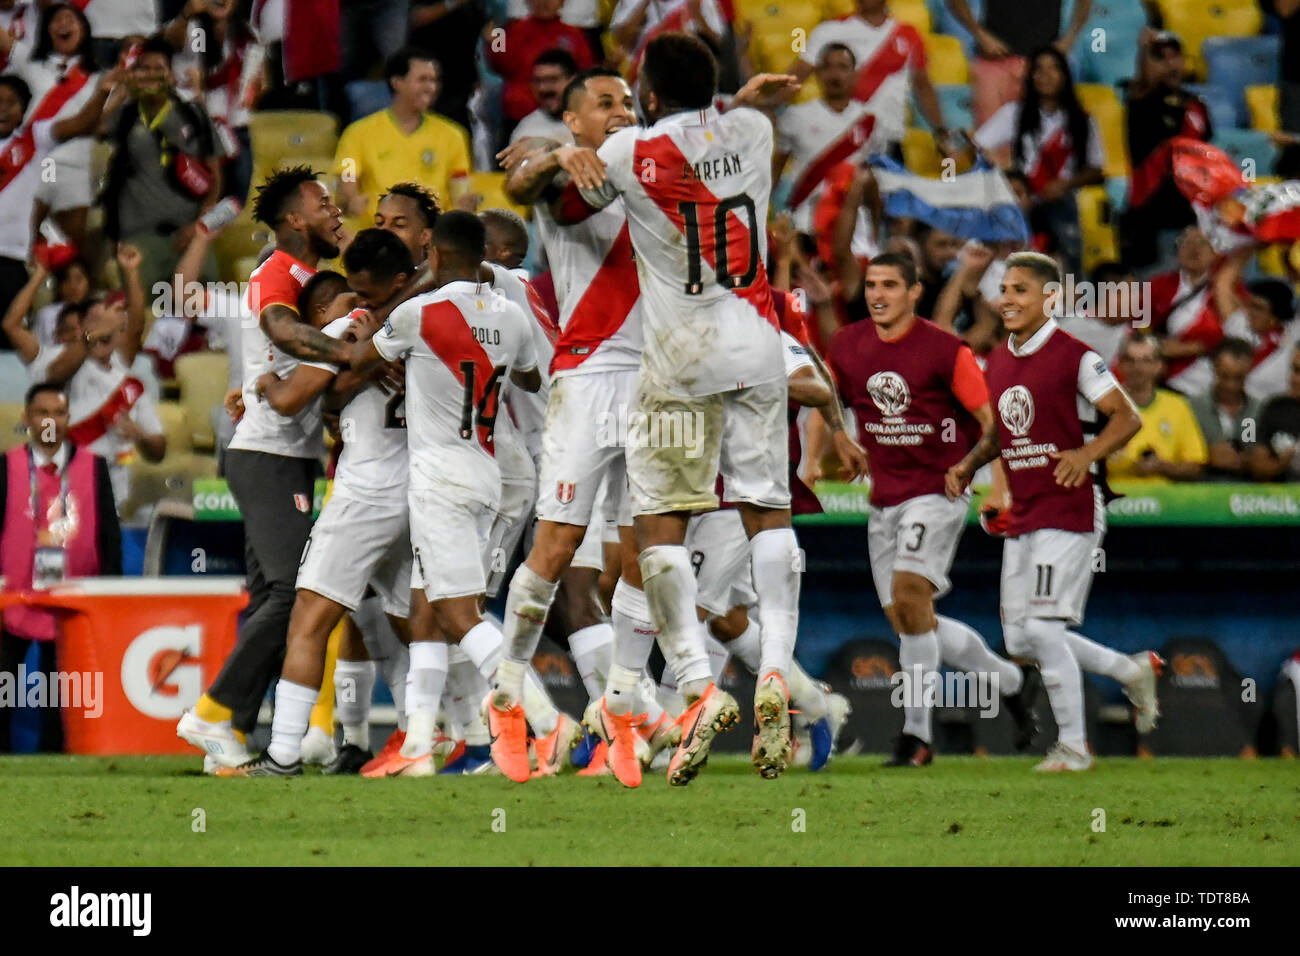 Rio De Janeiro, Brazil. 18th June, 2019. Edison Flores marks the third Peruvian goal during a match between Bolivia and Peru, valid for the group stage of the Copa America 2019, held on Tuesday (18) at the Maracanã Stadium in Rio de Janeiro, RJ. Credit: Nayra Halm/FotoArena/Alamy Live News Stock Photo